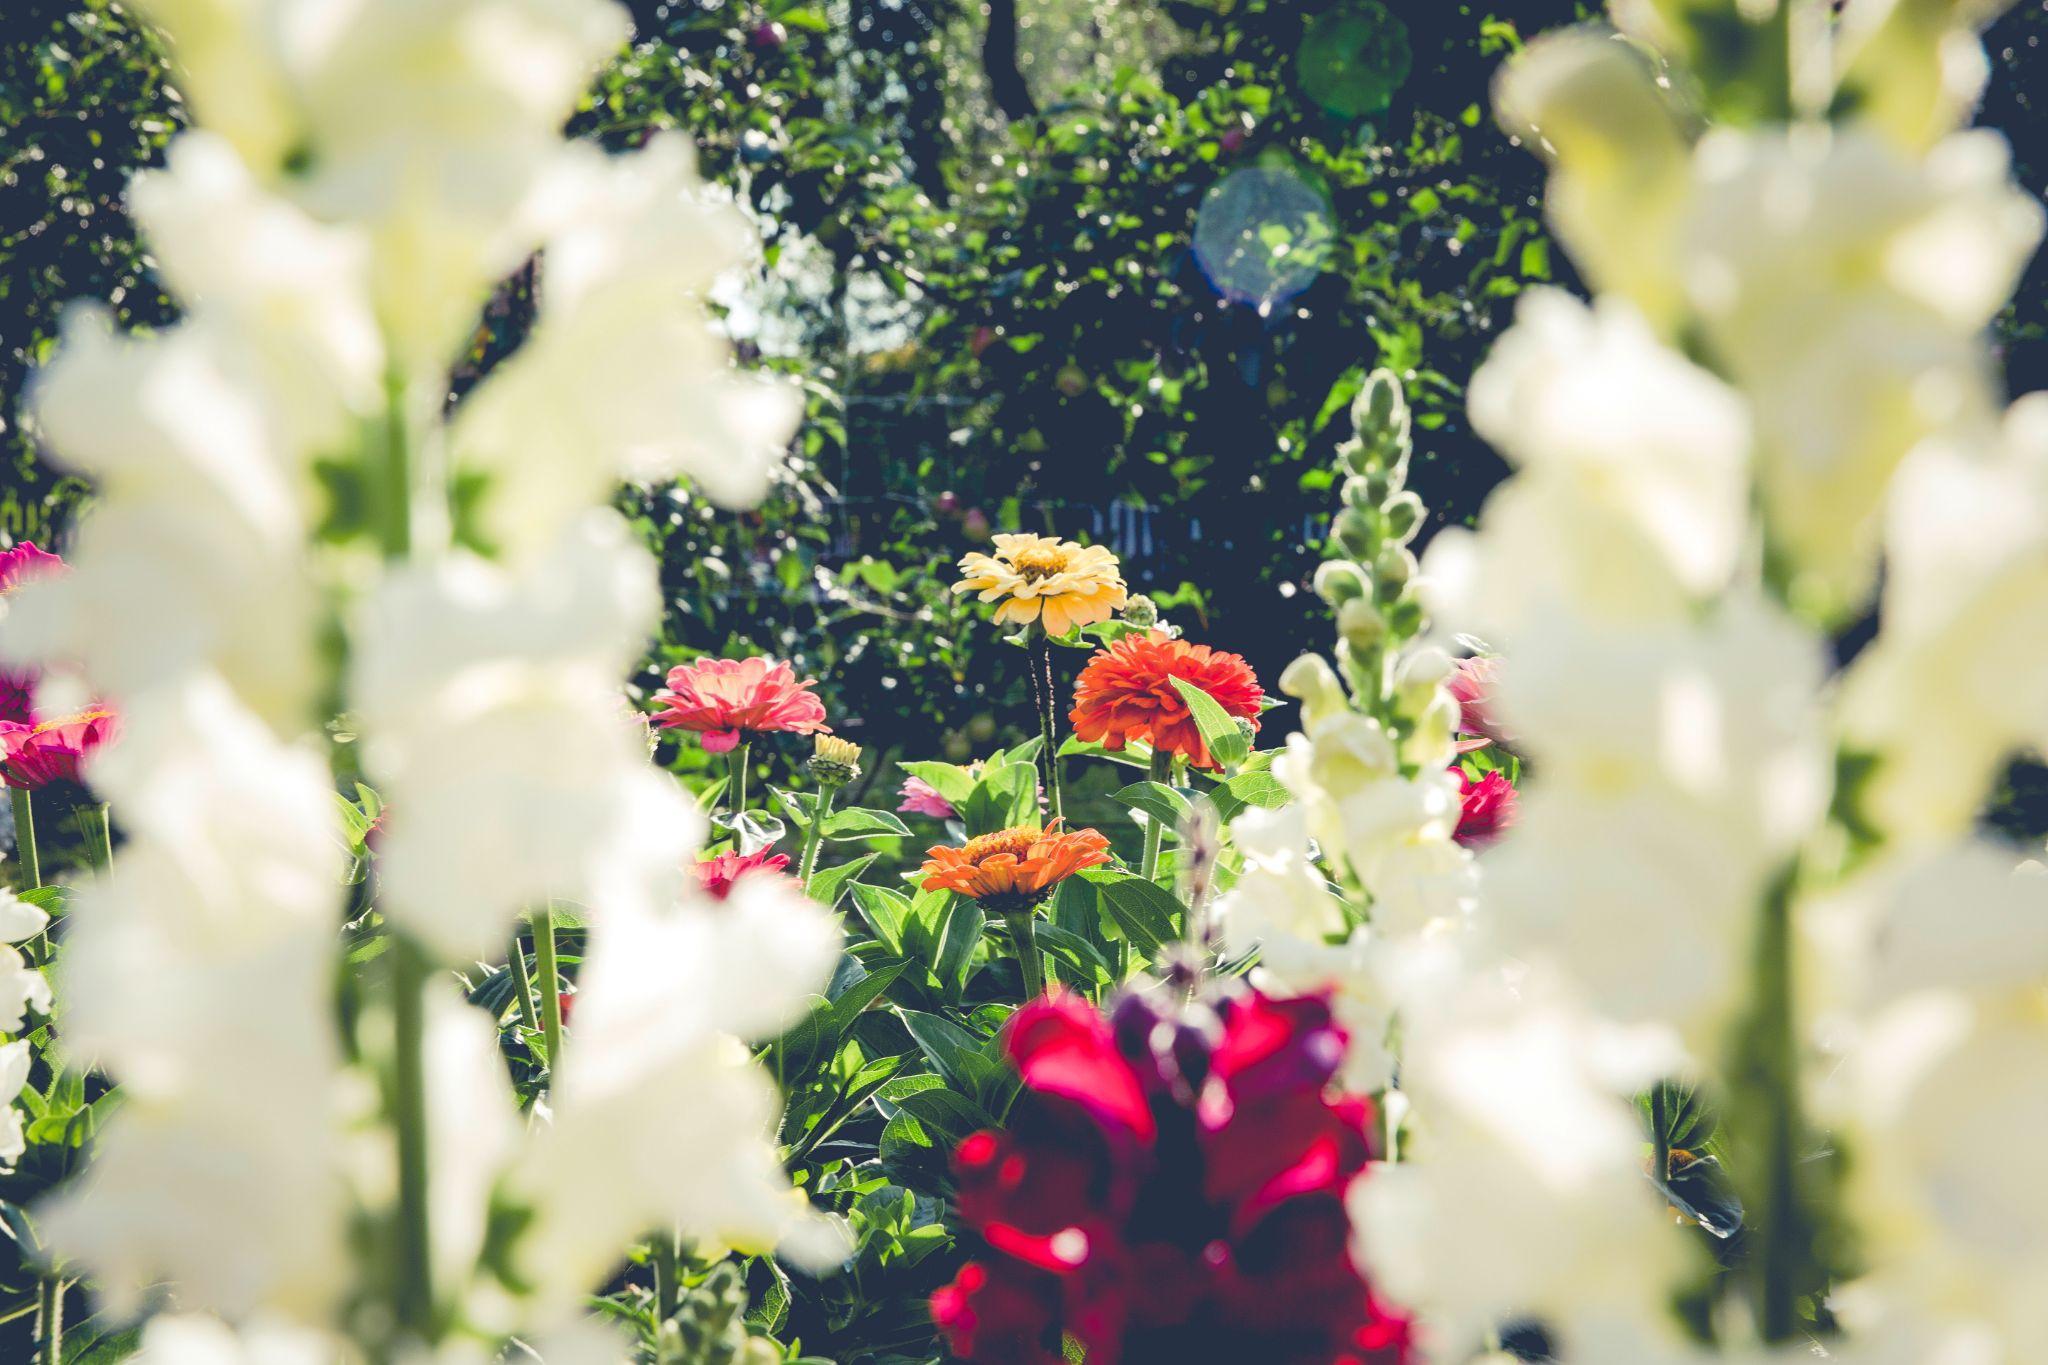 6 Things You Can Do To Make Your Garden An Oasis Of Tranquility